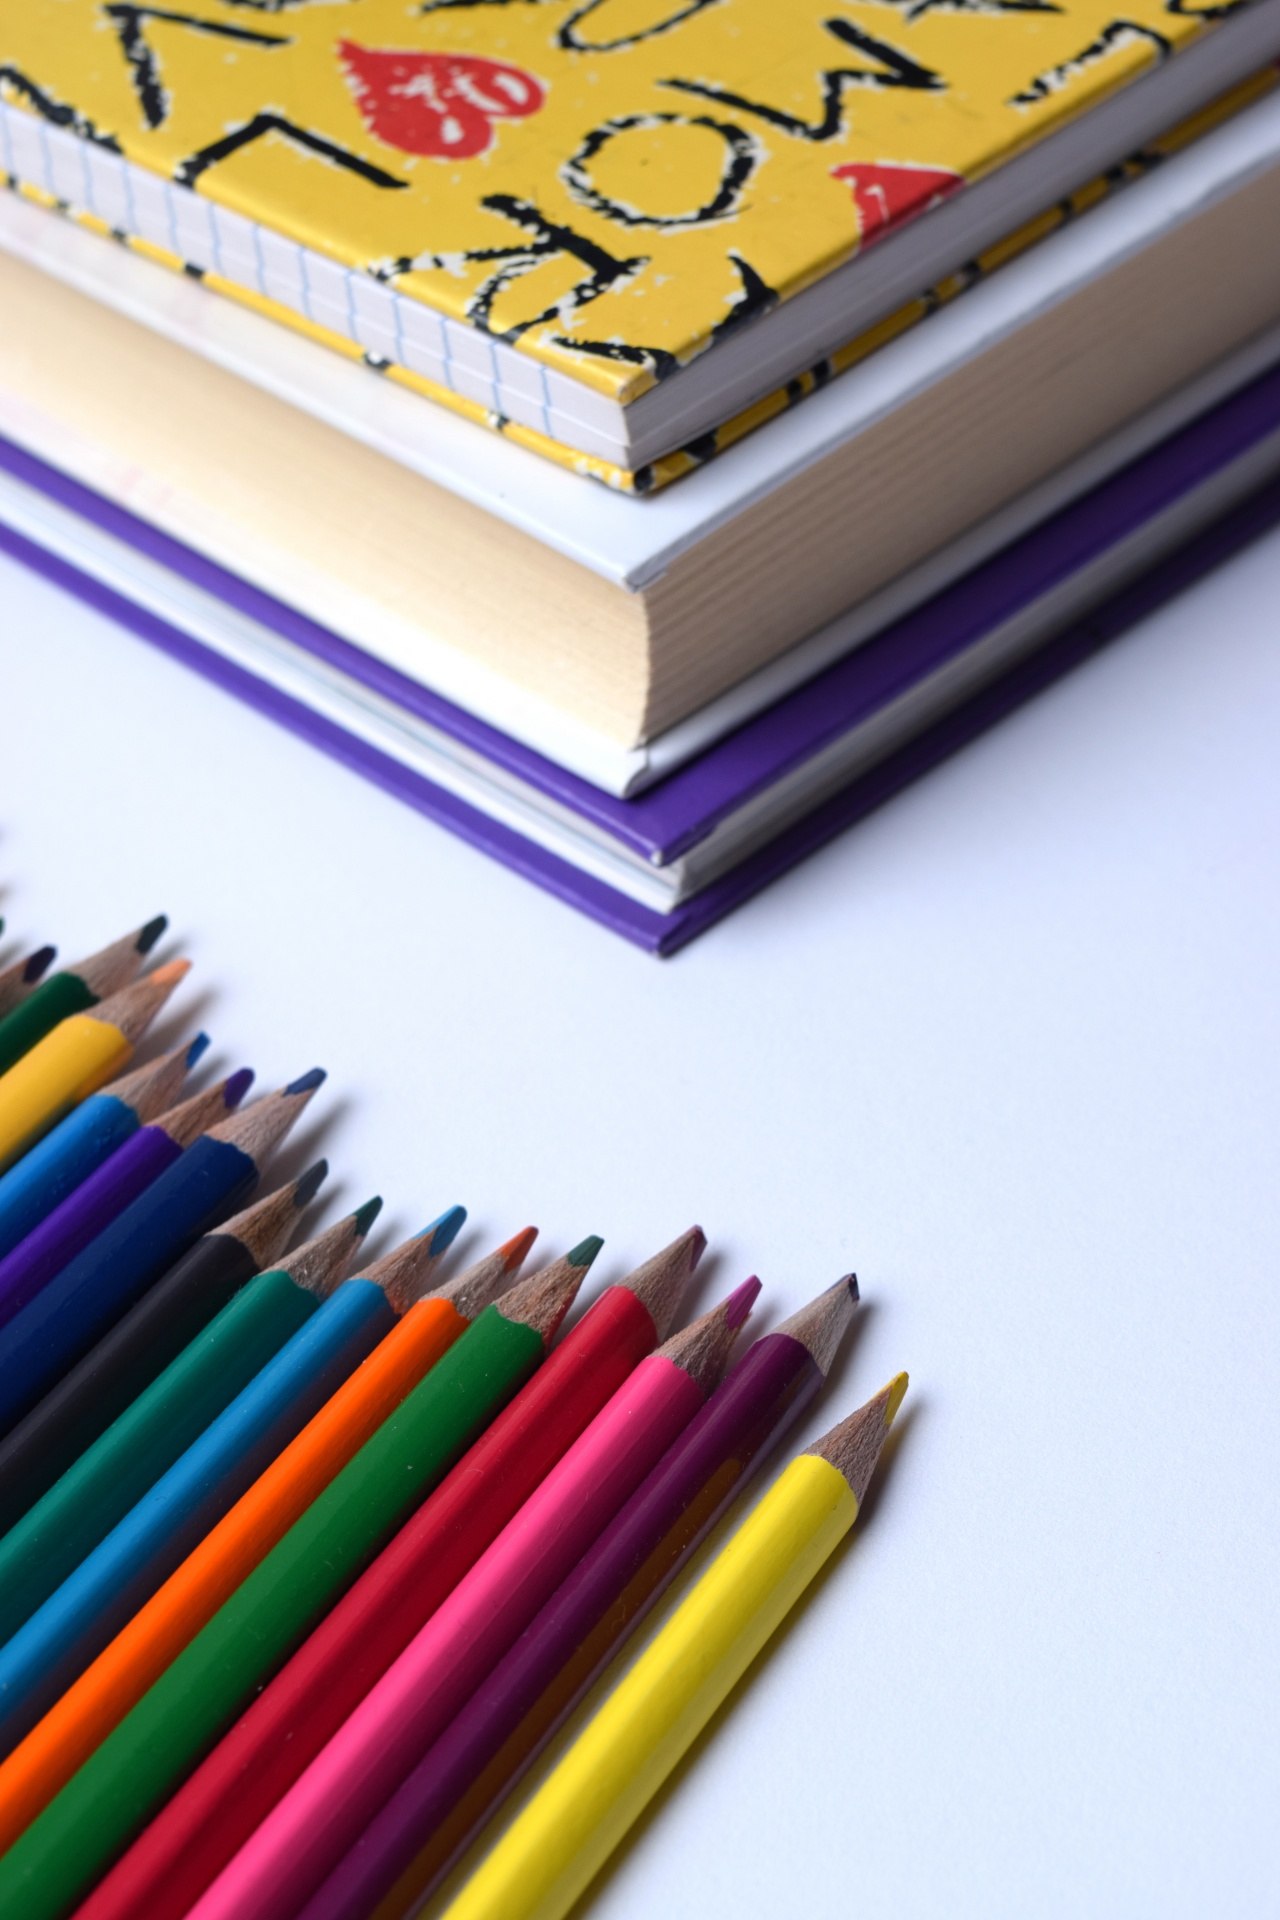 school-supplies-free-stock-photo-public-domain-pictures